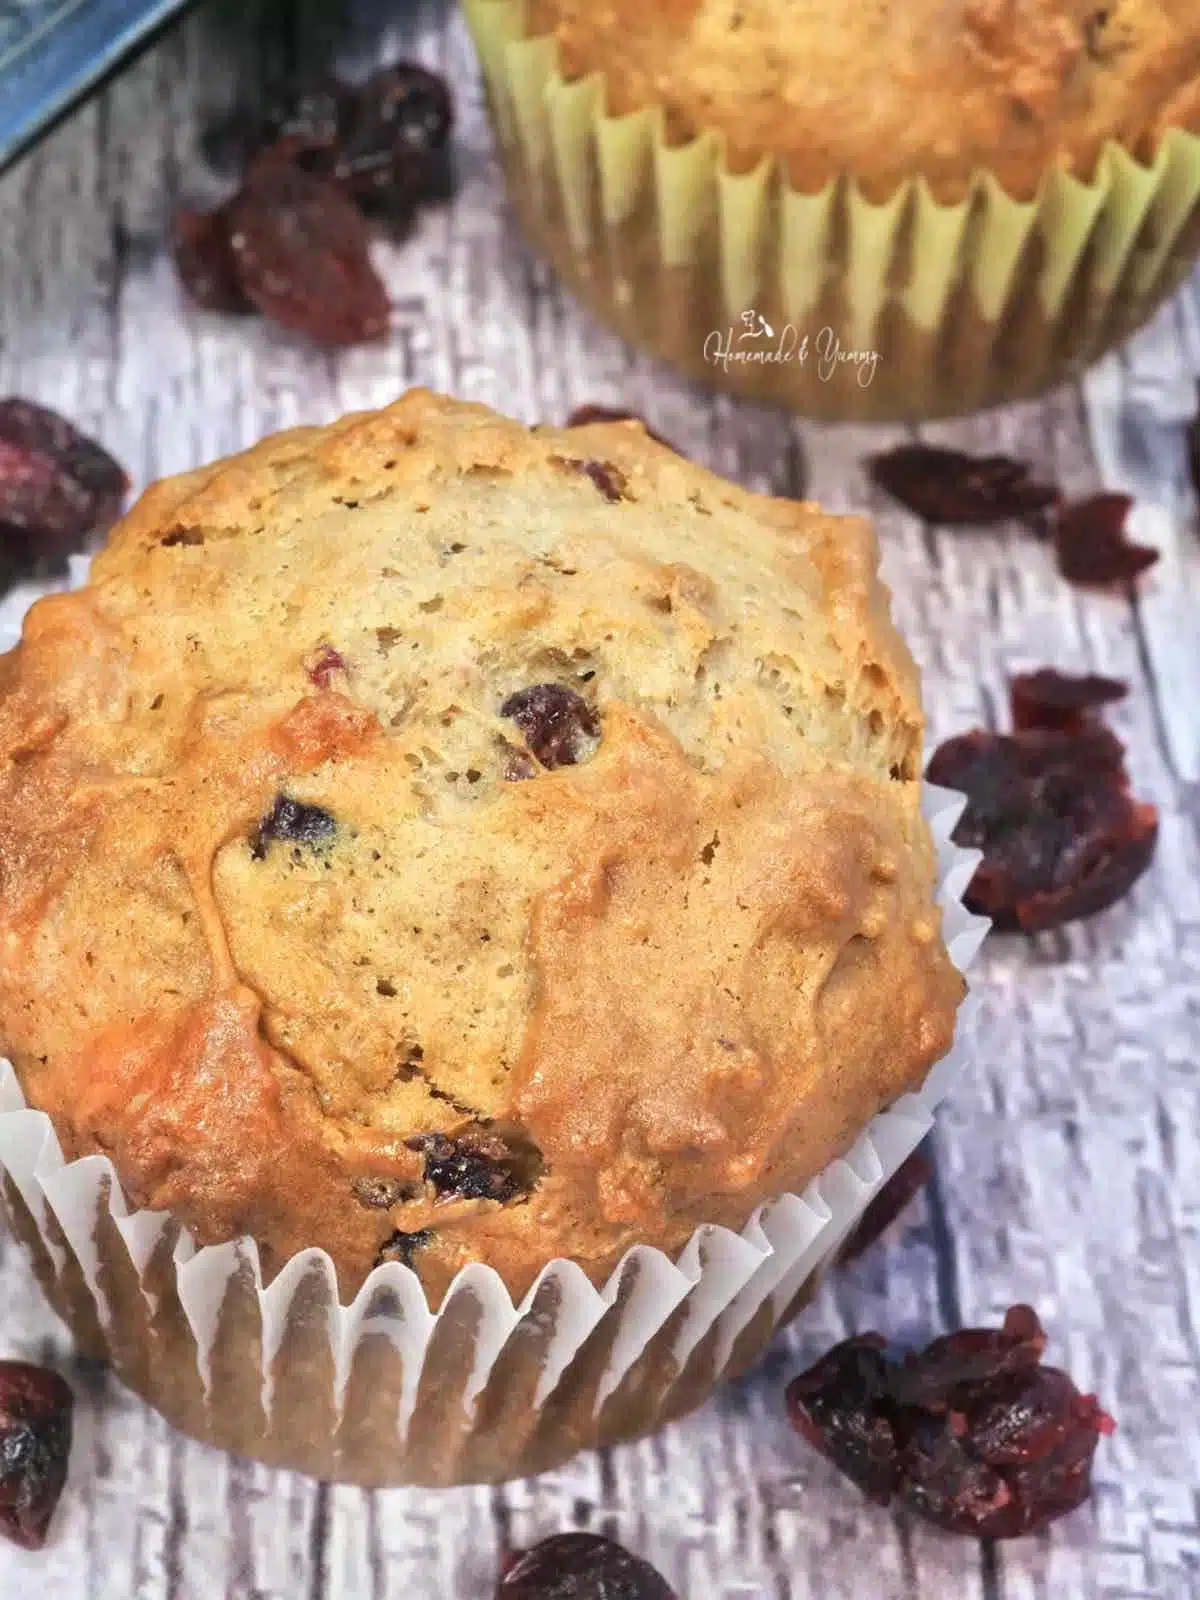 Cranberry muffin made with bran flakes and orange extract.